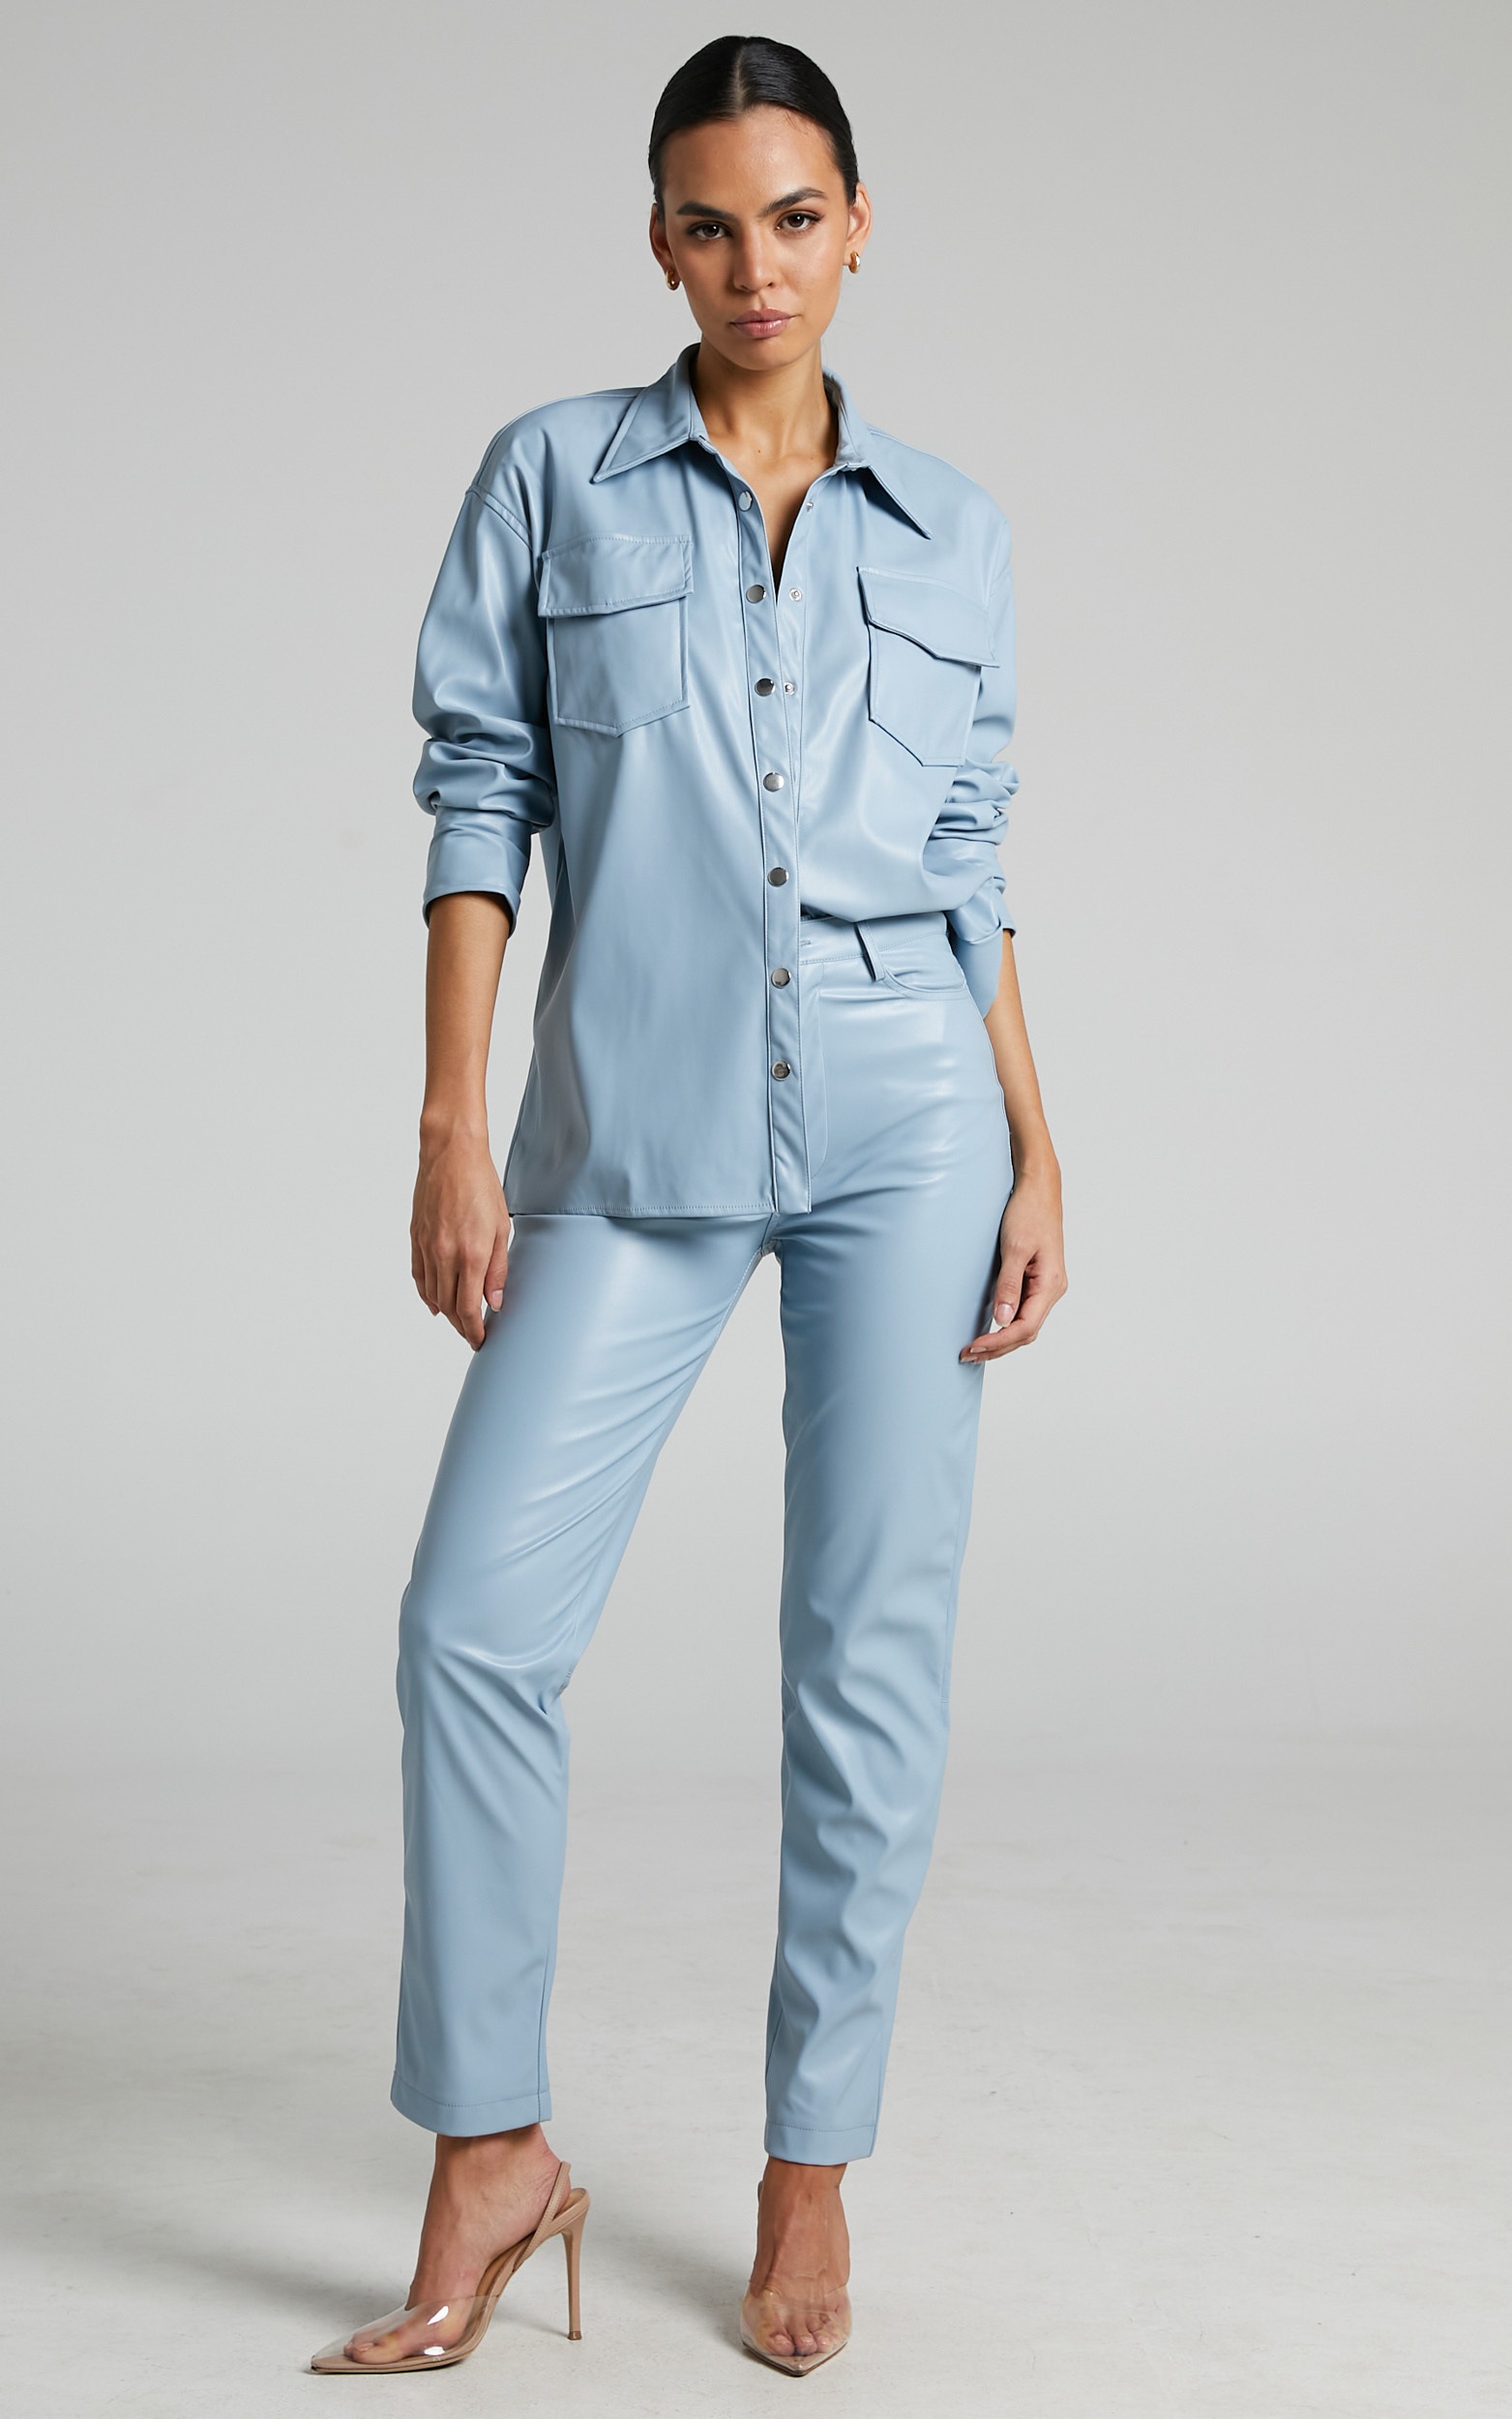 Selenia Button Front Faux Leather Shirt in Blue - 04, BLU1, hi-res image number null